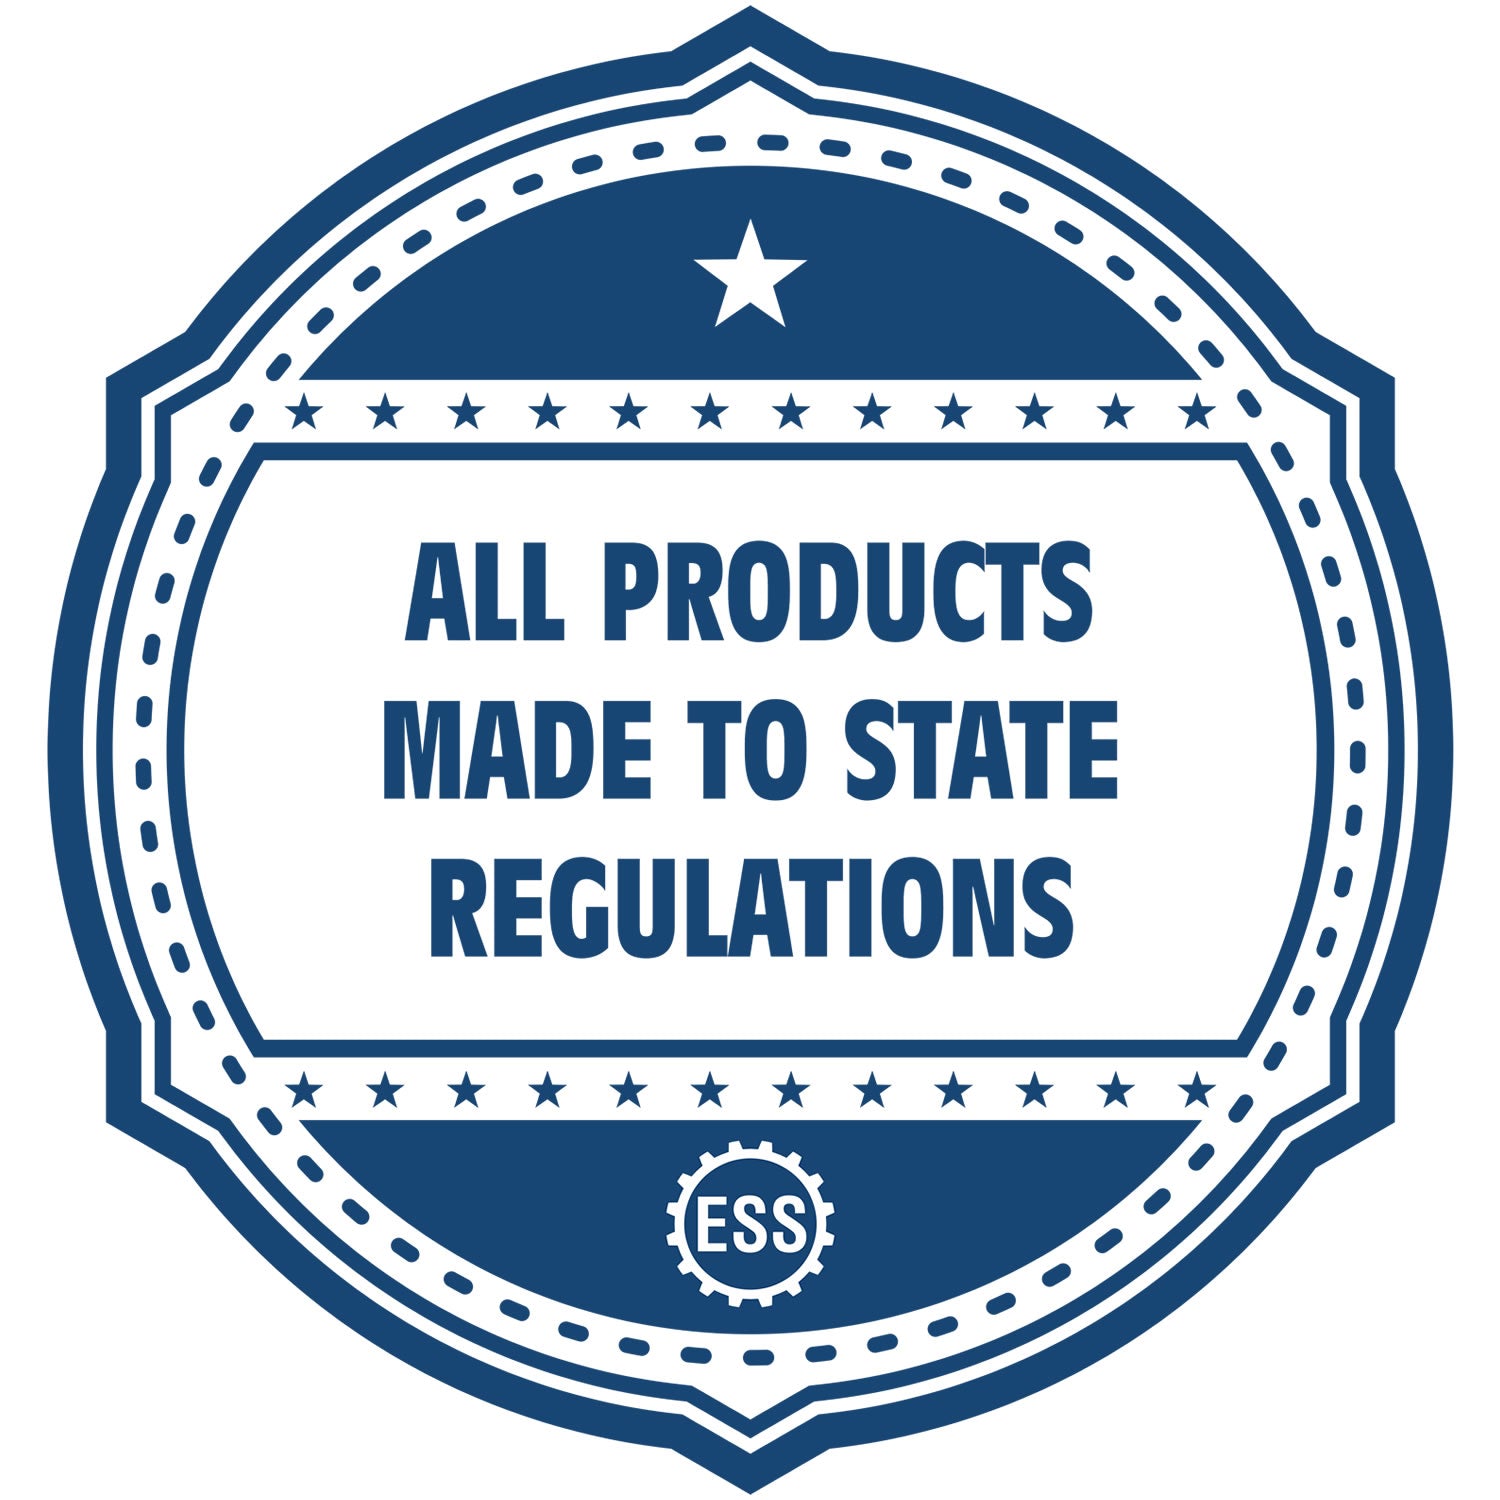 An icon or badge element for the Mississippi Professional Engineer Seal Stamp showing that this product is made in compliance with state regulations.